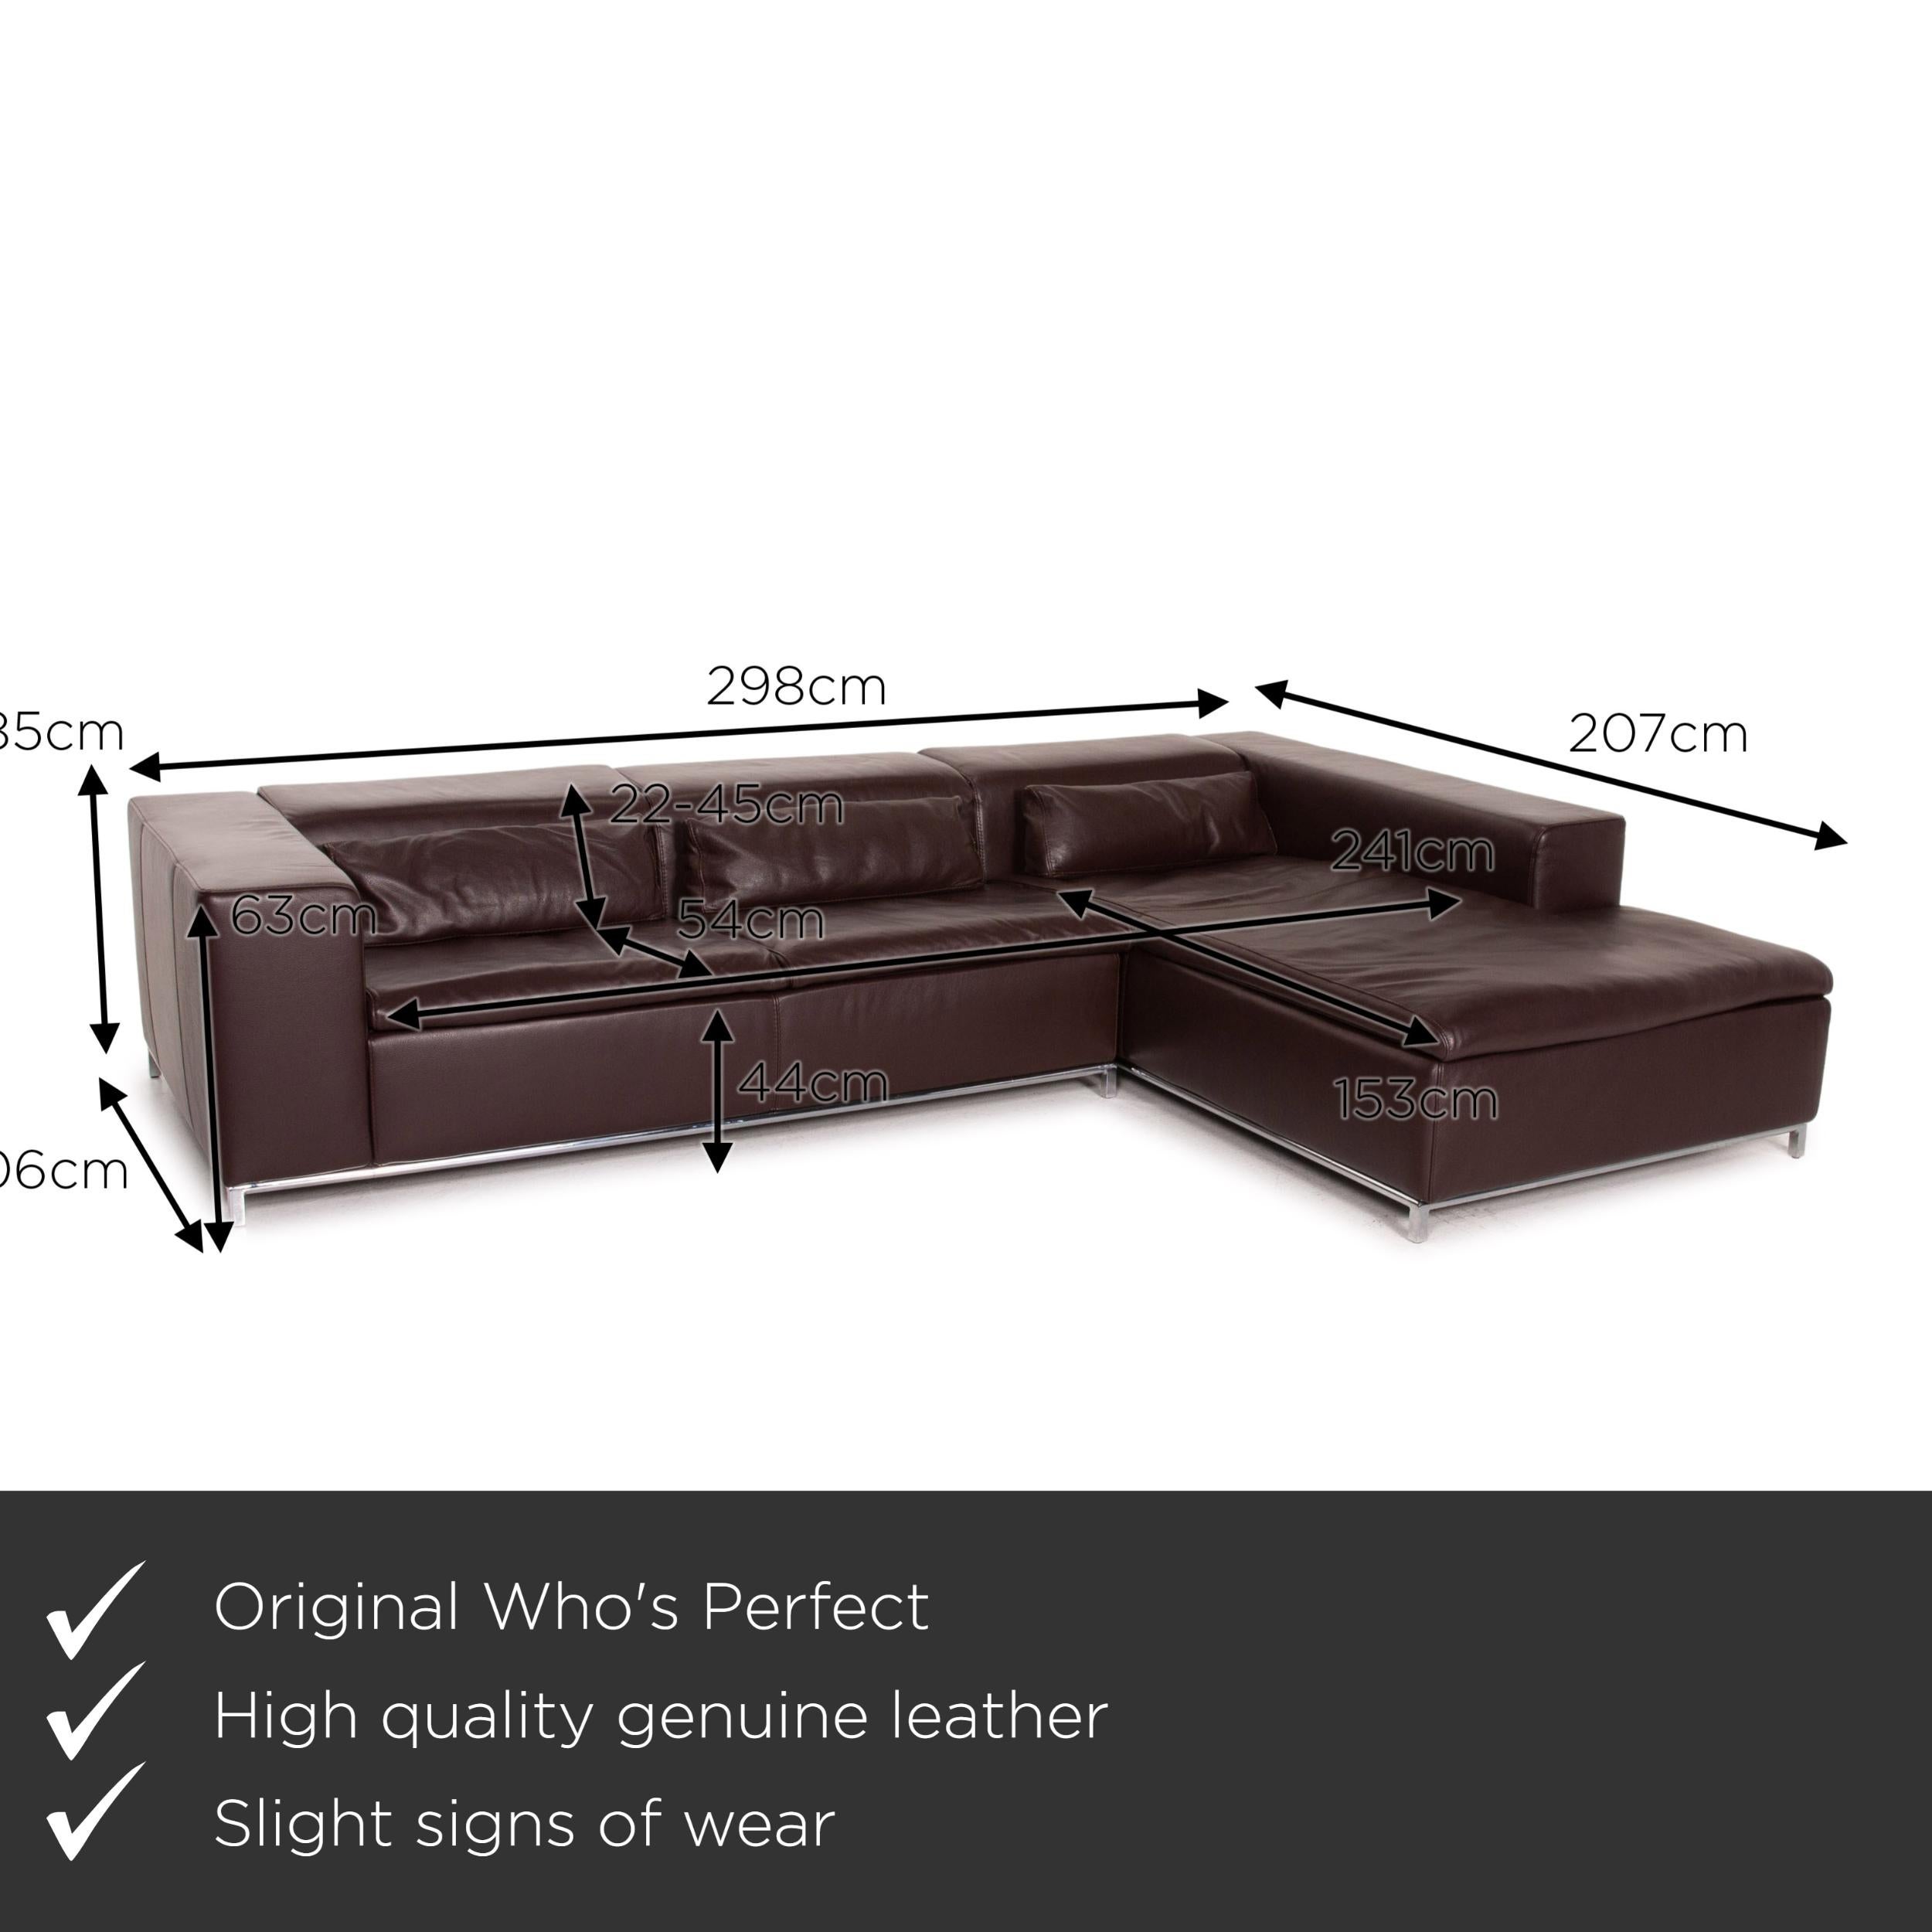 We present to you a Who's Perfect leather corner sofa brown dark brown sofa couch.
 
 

 Product measurements in centimeters:
 

Depth 106
Width 298
Height 63
Seat height 44
Rest height 63
Seat depth 54
Seat width 241
Back height 22.